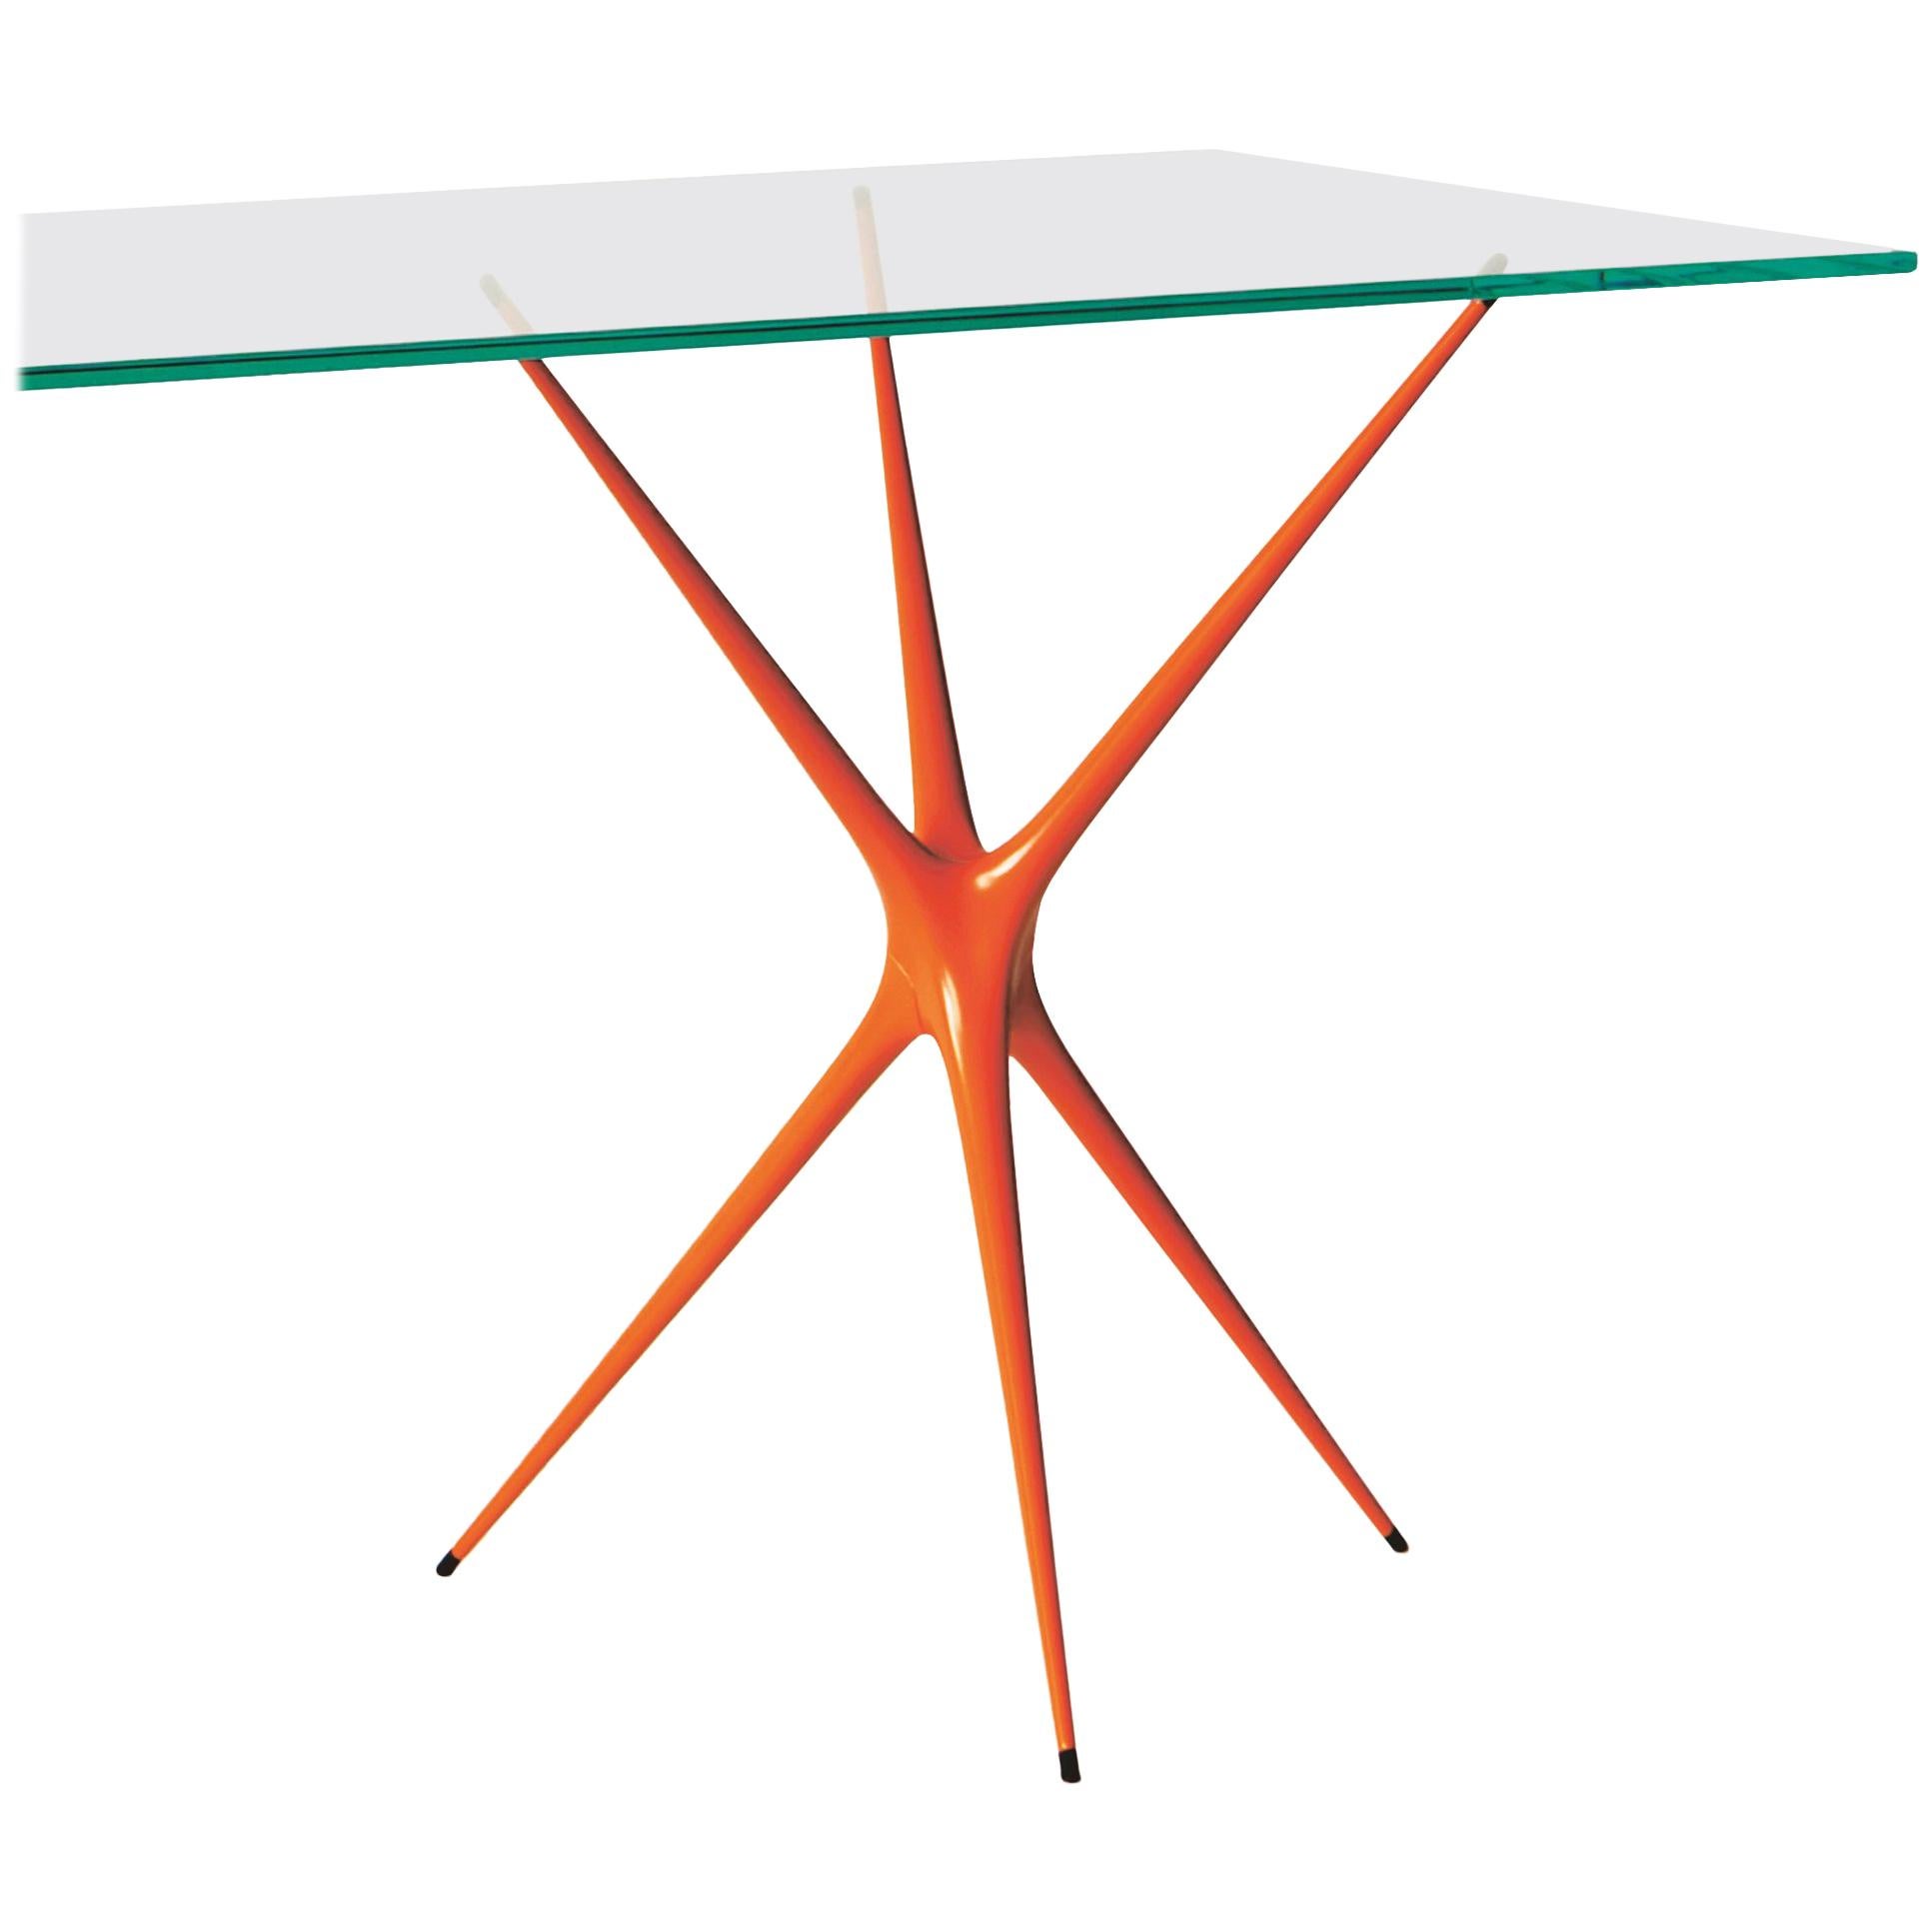 Supernova, Recycled Cast Aluminum Trestle Table Leg in Orange by Made in Ratio